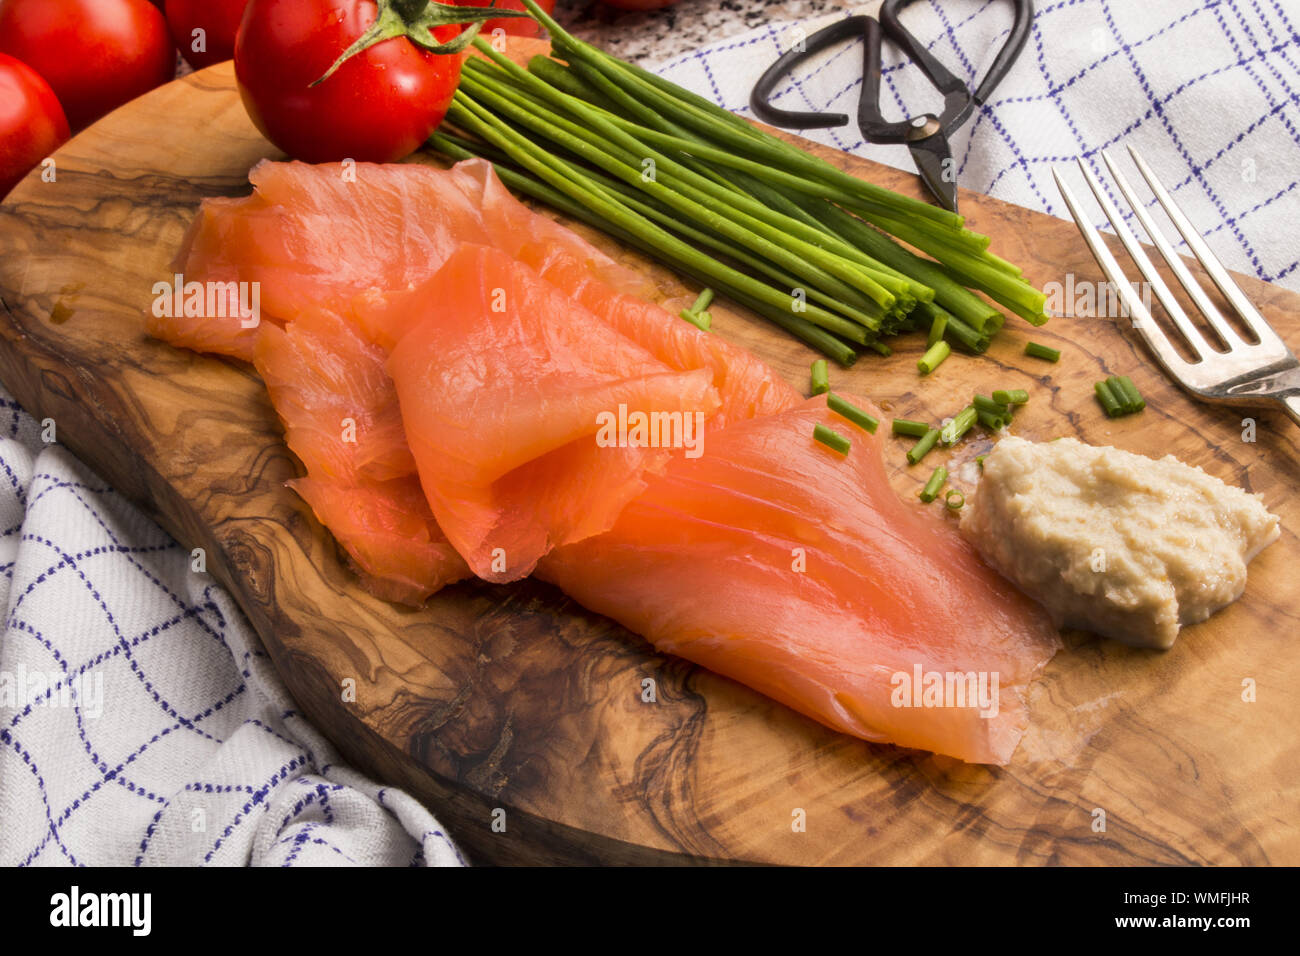 scottish smoked salmon on a wooden board with chive, tomato, horseradish and fork Stock Photo